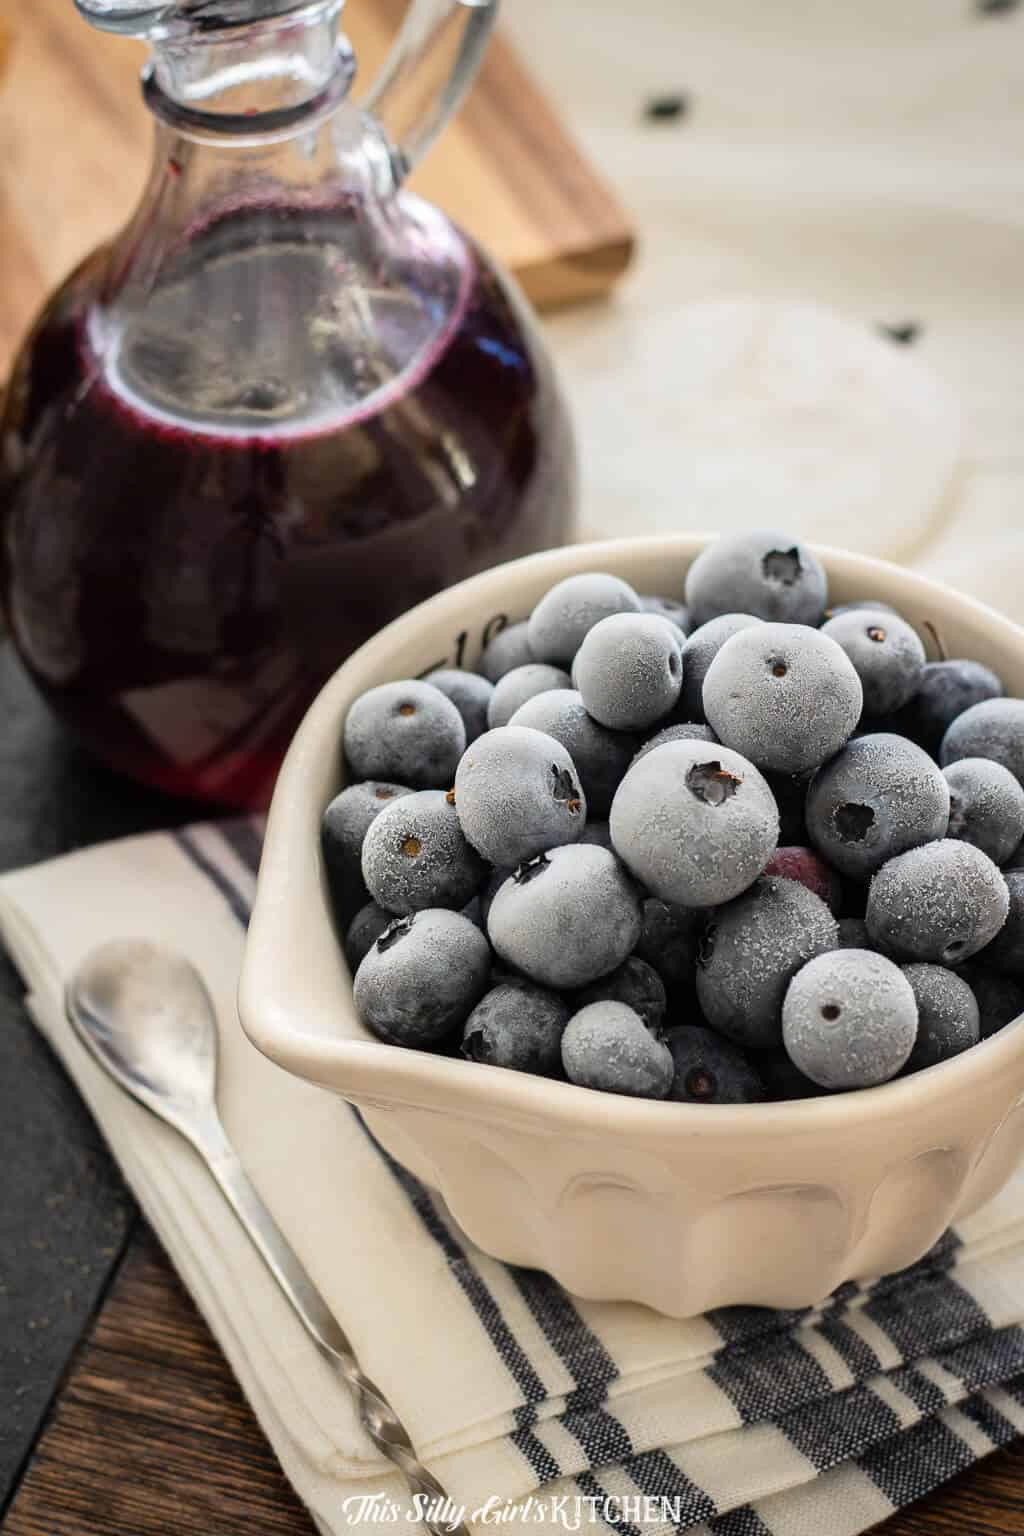 Blueberry simple syrup is made with just three simple ingredients. #recipe from thissillygirlskitchen.com #blueberry #simplesyrup #blueberrysimplesyrup #blueberrysyrup